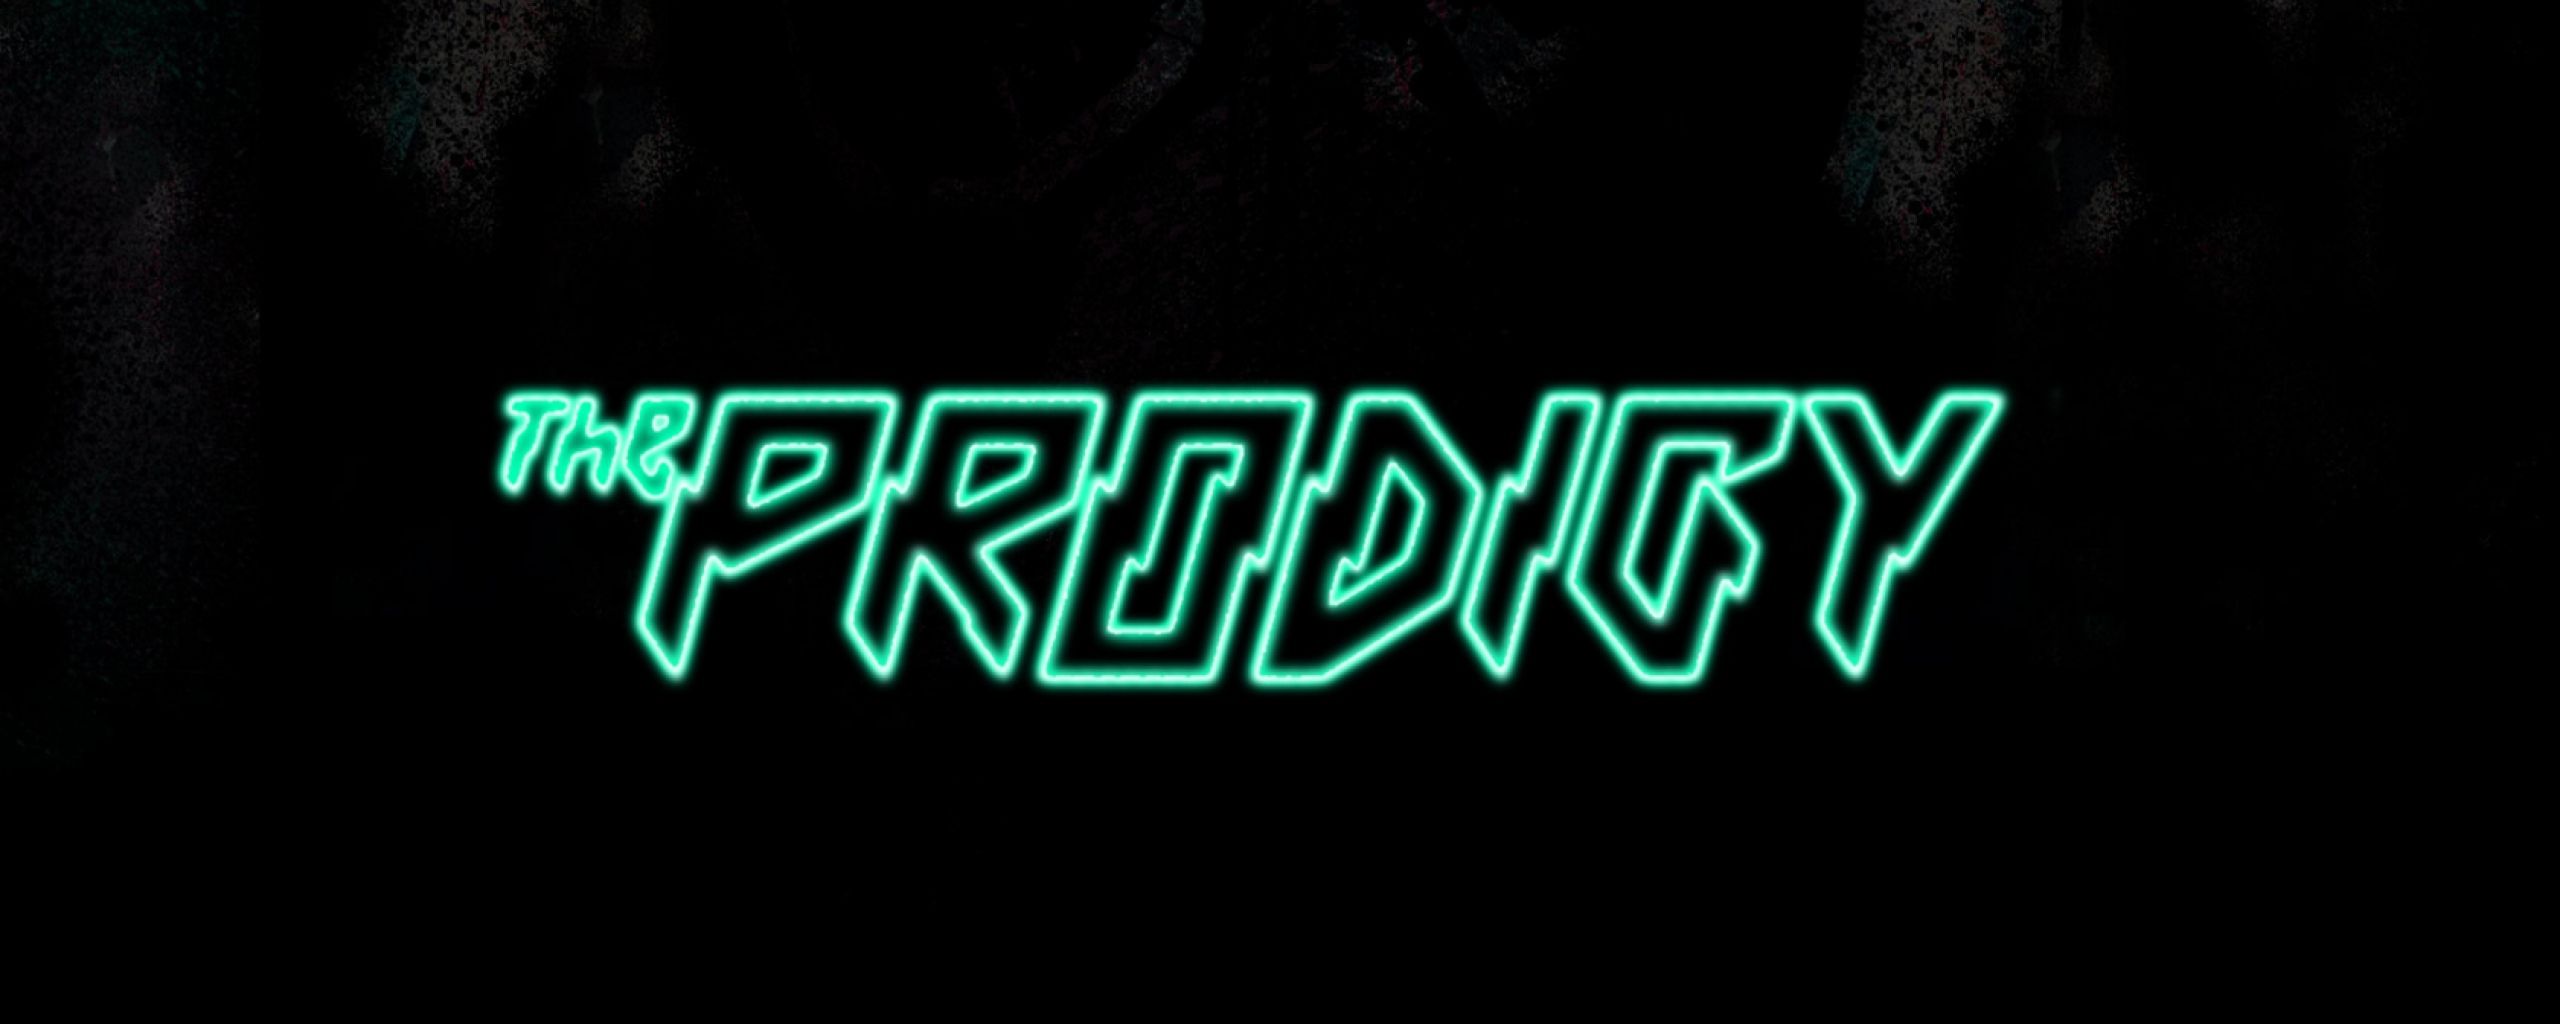 Download Wallpaper 2560x1024 The prodigy, Name, Font, Background